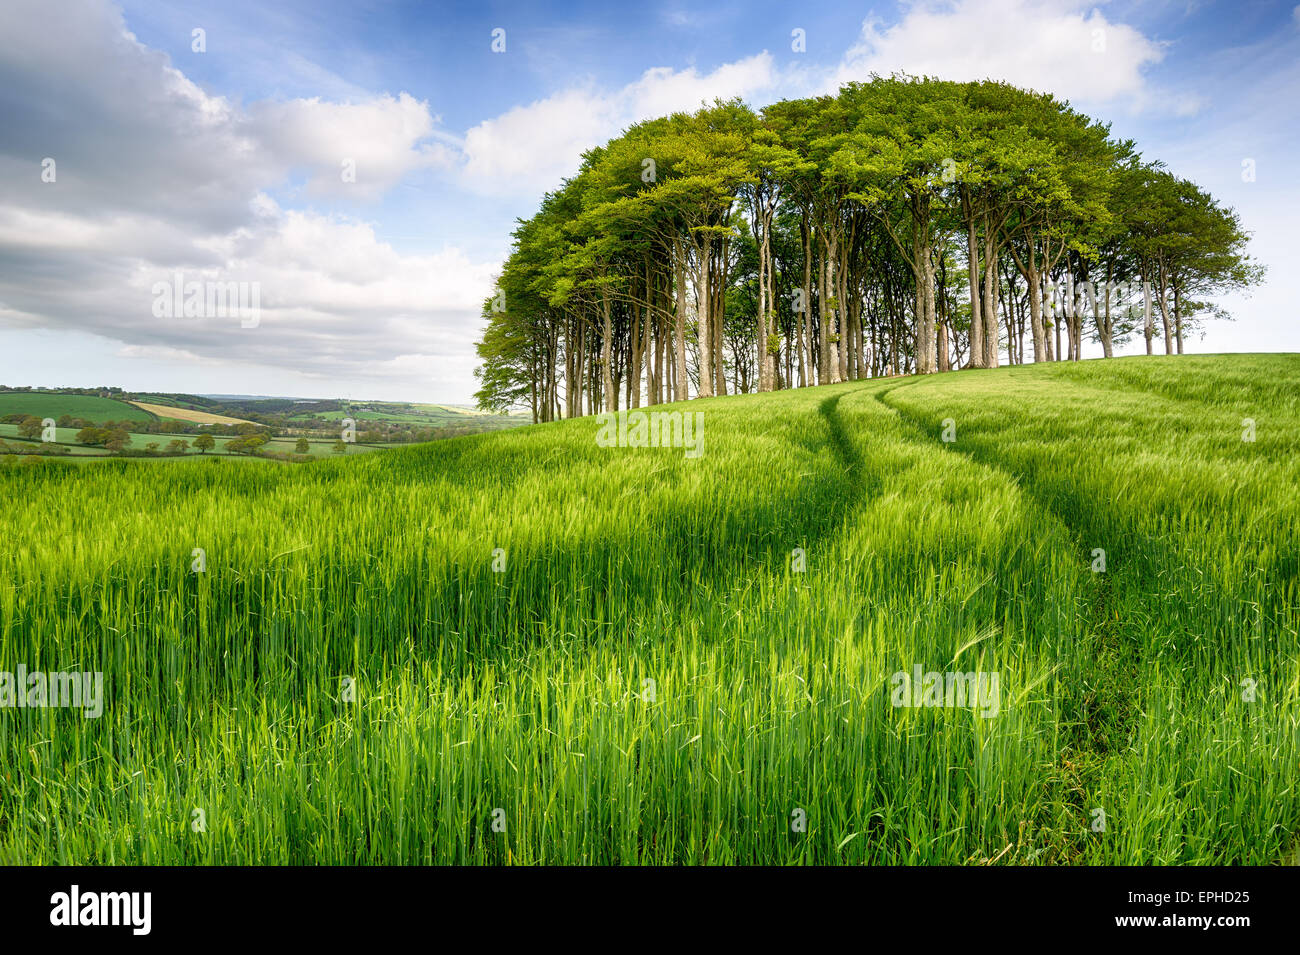 A stand of beech trees growing in a filed of lush green barley Stock Photo